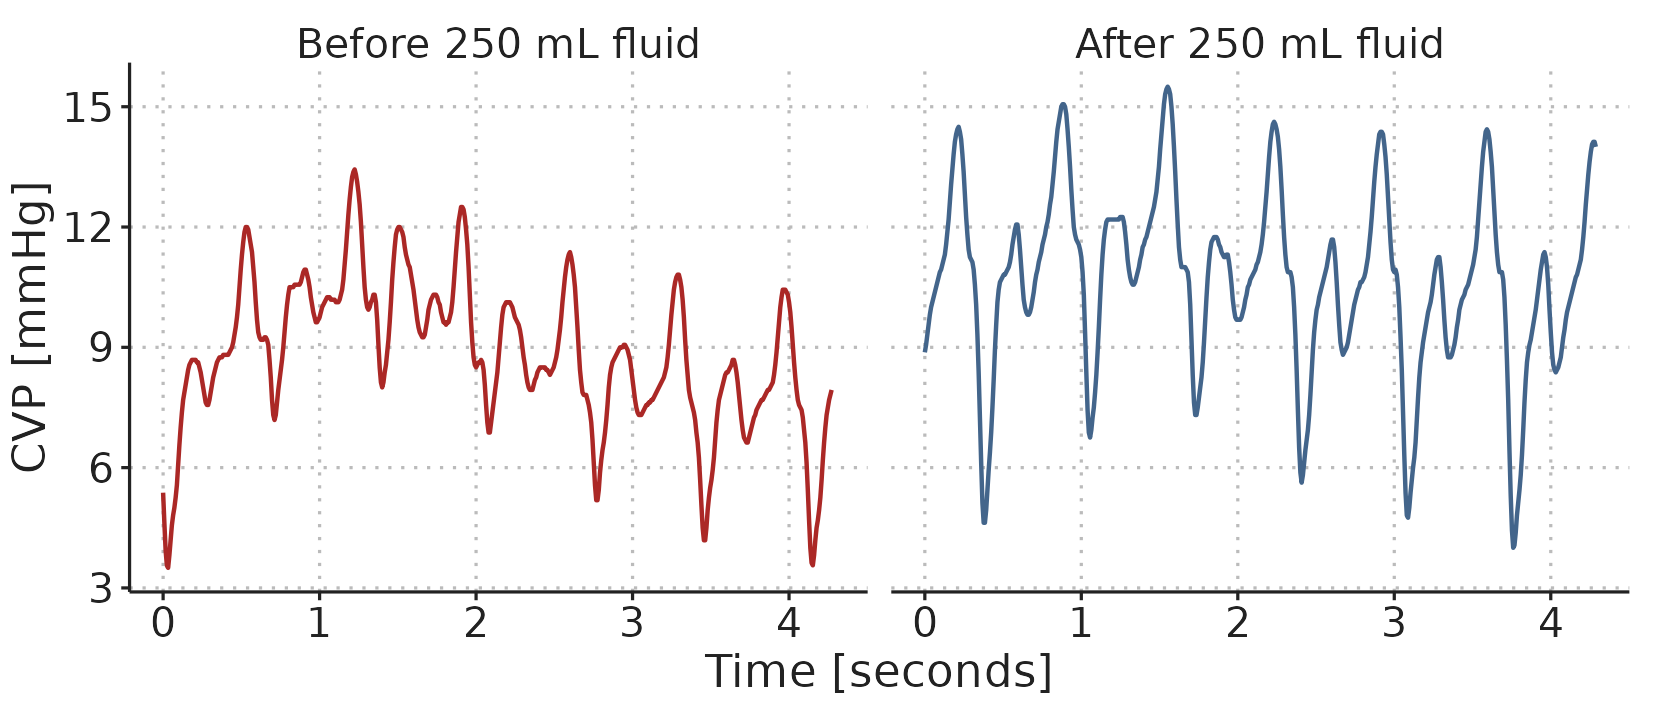 A sample of the CVP waveform recorded before and after administration of 250 ml fluid.